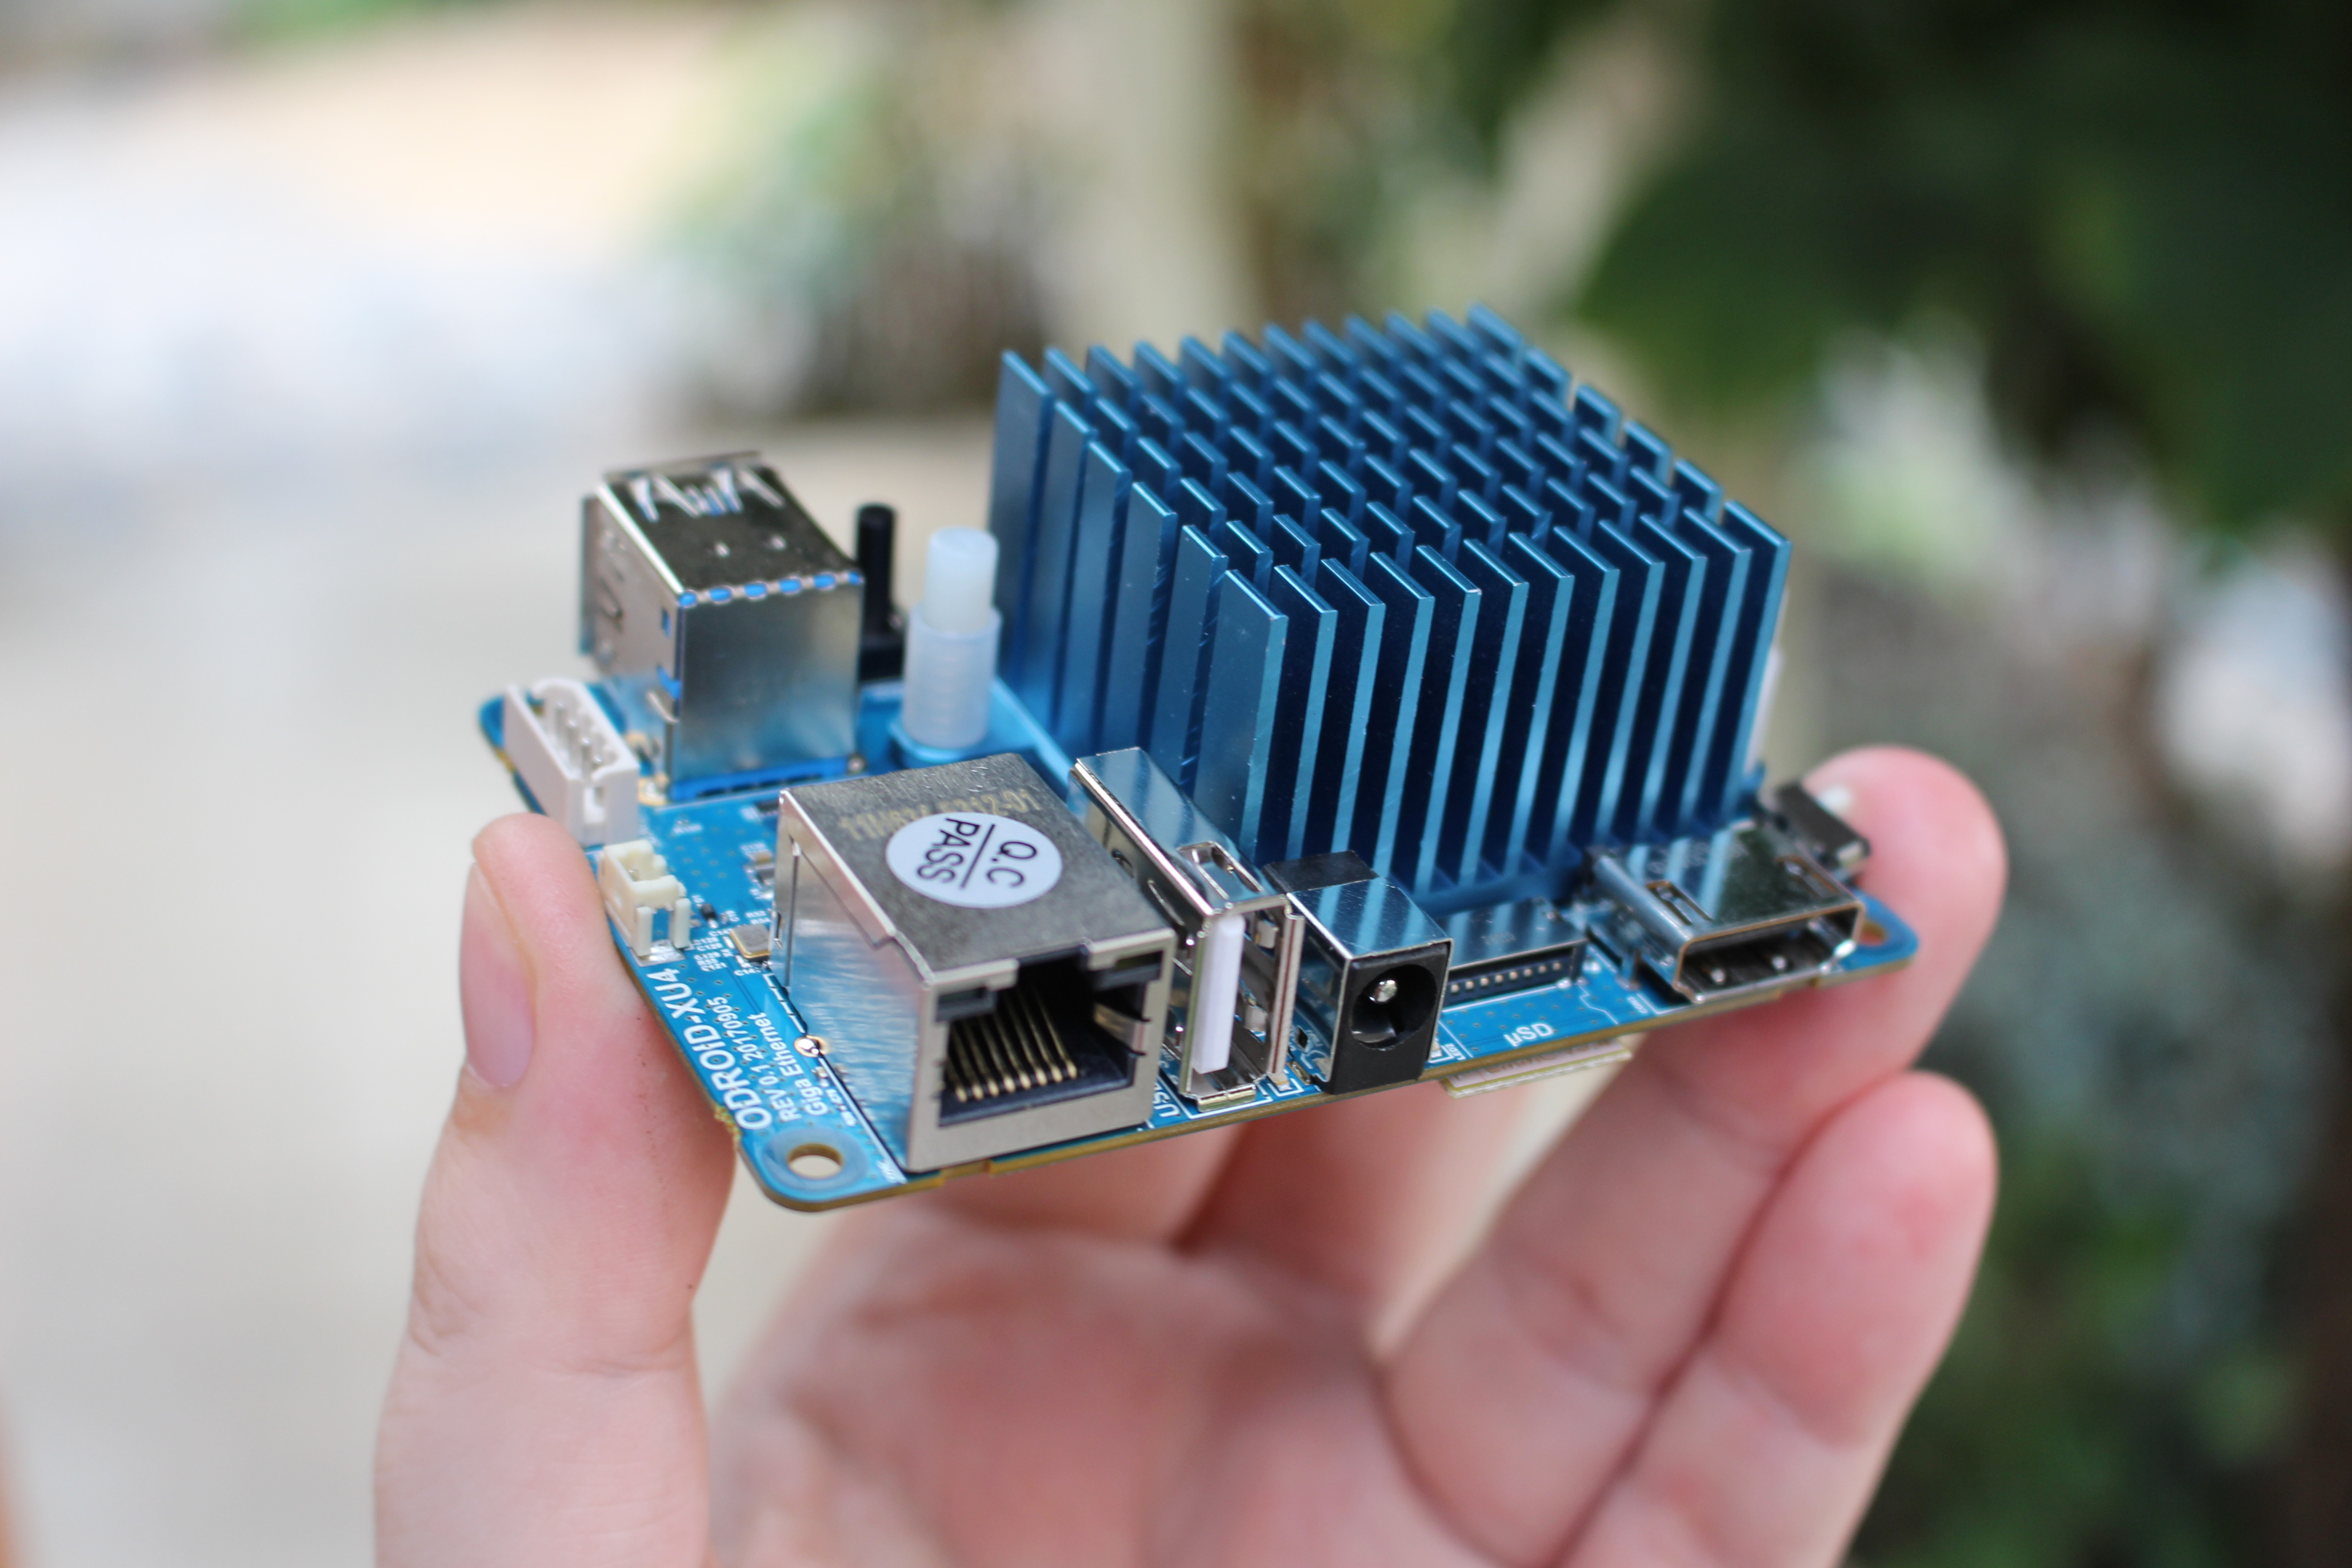 Odroid-XU4 board with integrated Heat Sink